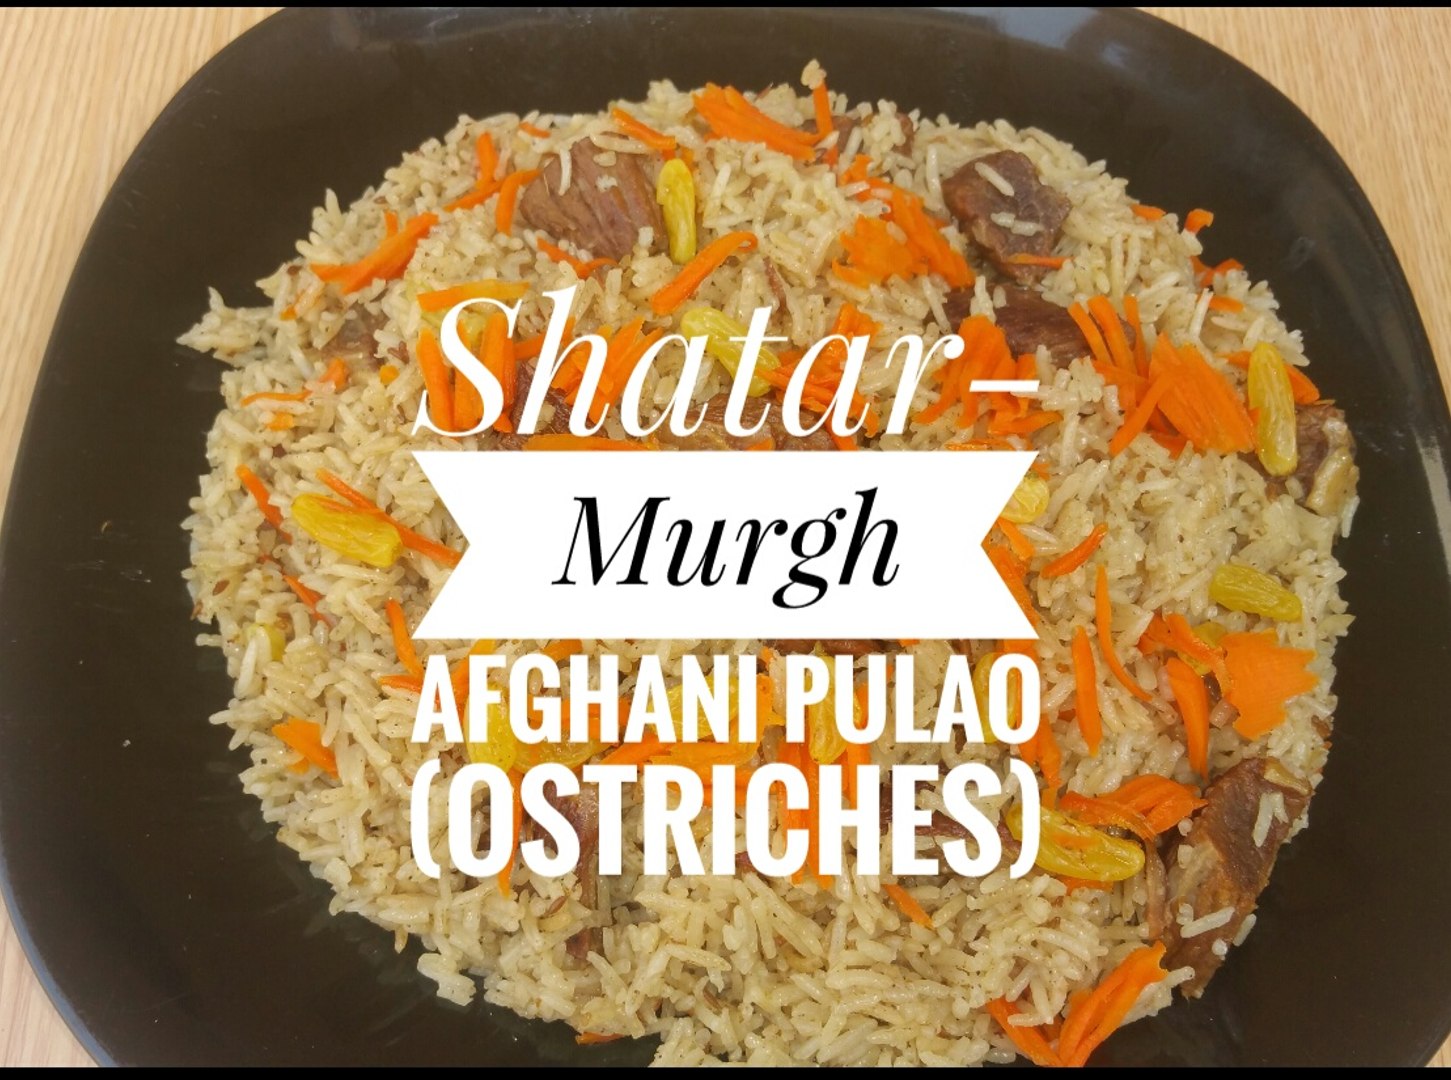 Afghani pulao || Kabuli Pulao || Shatar-Murgh || Ostriches || By Food Lover's